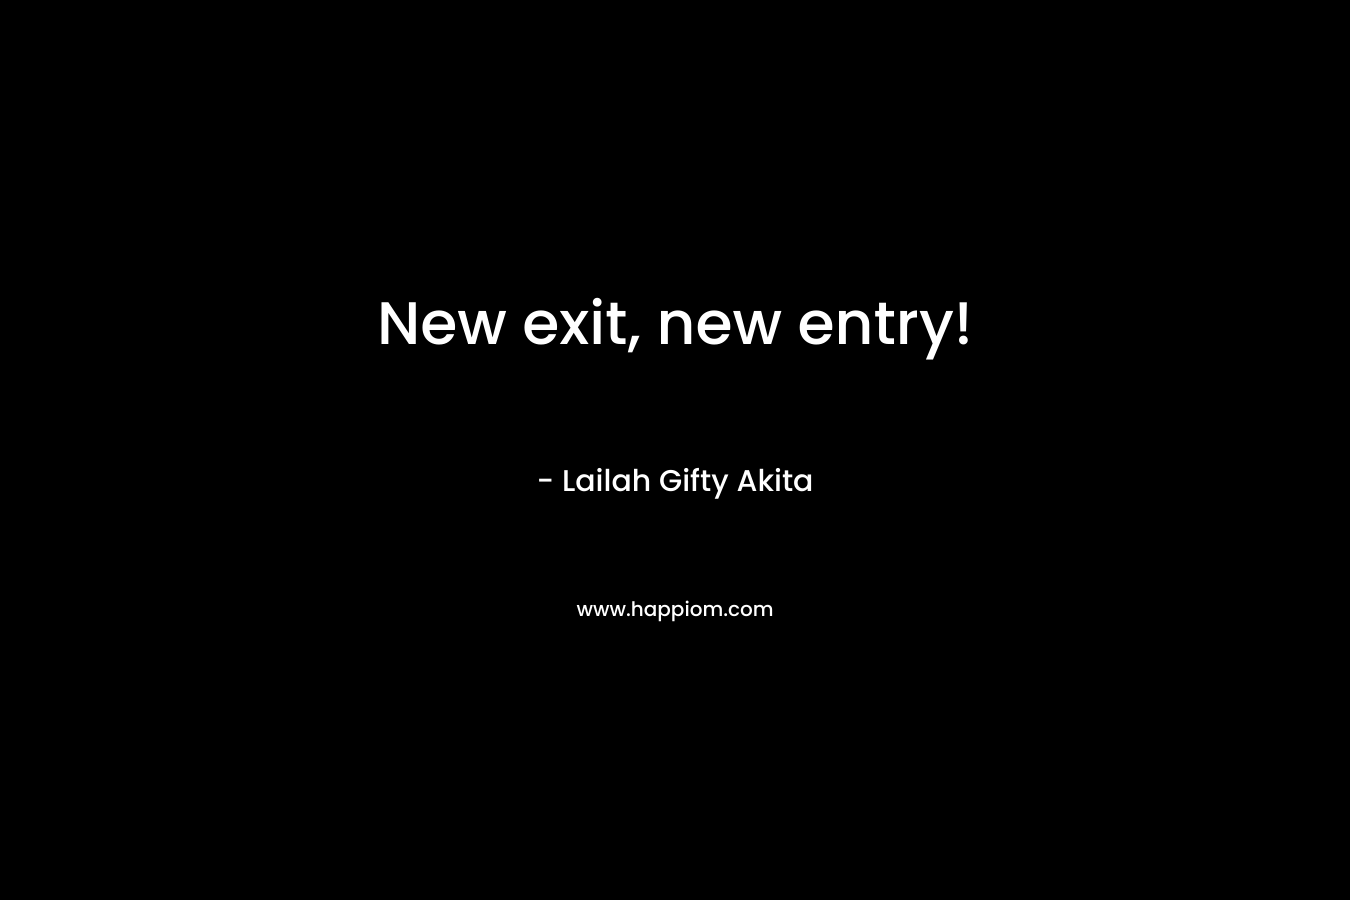 New exit, new entry! – Lailah Gifty Akita